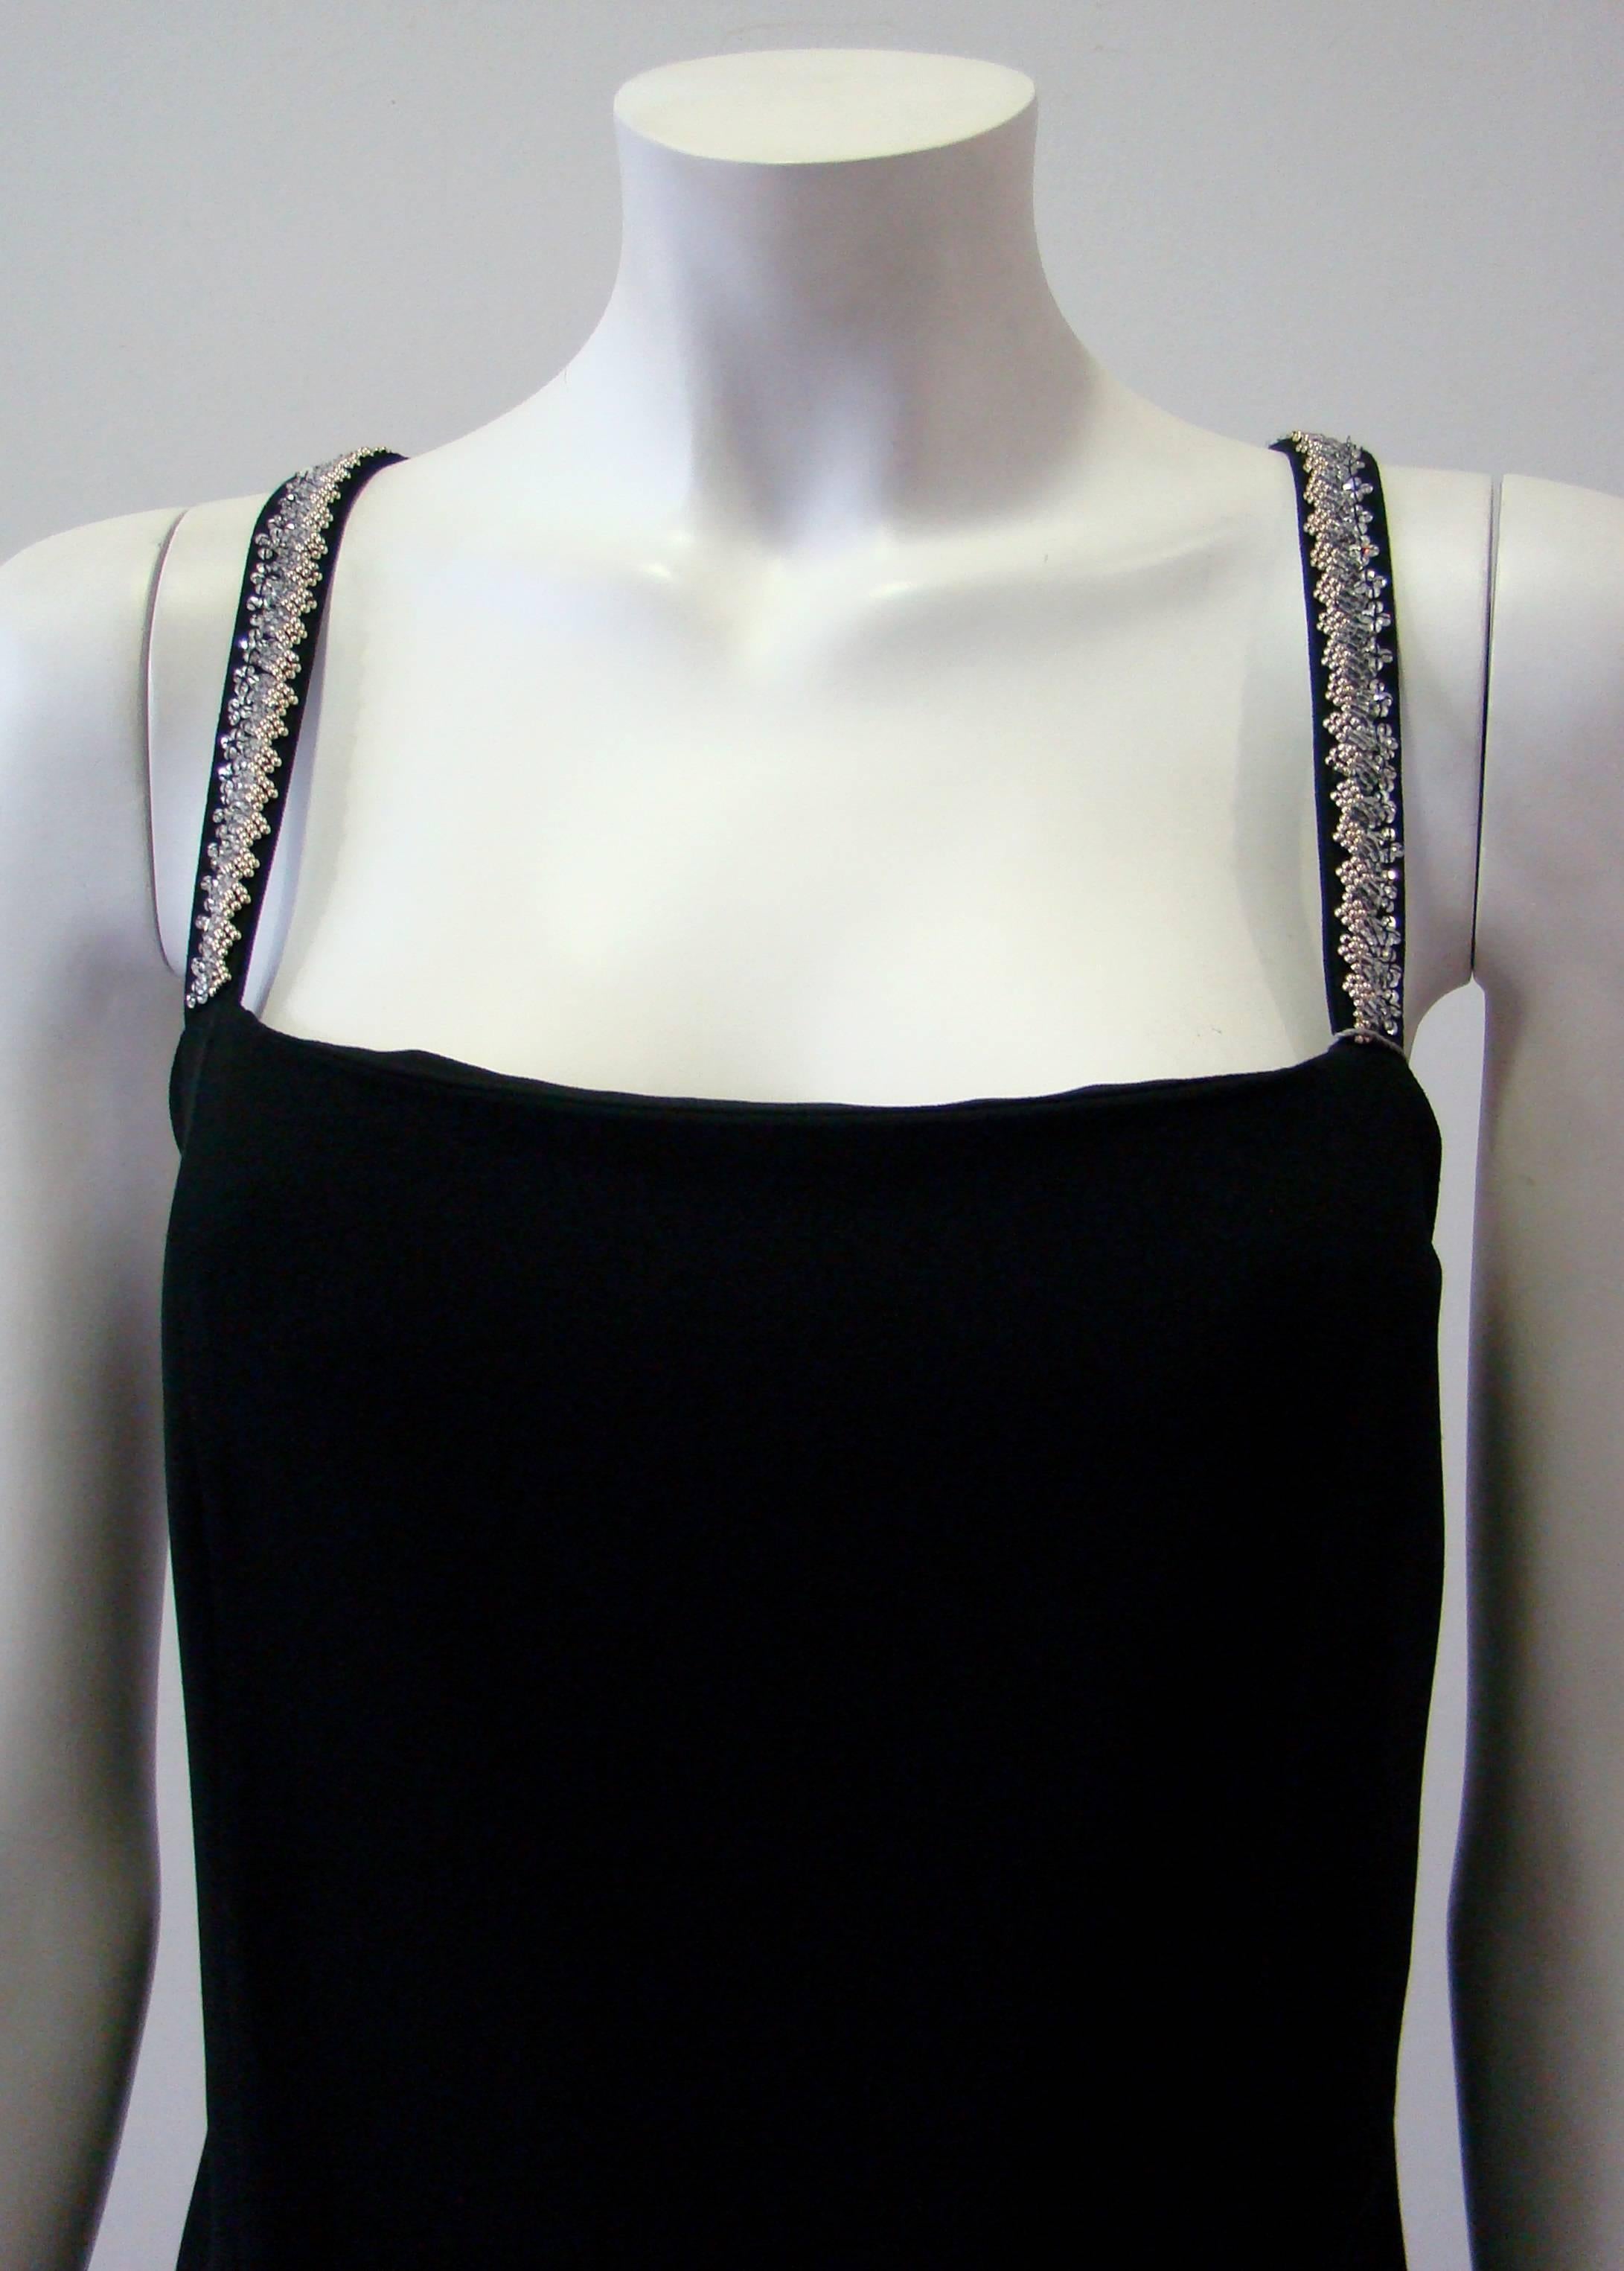 Gianni Versace Versatile Evening Dress In Excellent Condition For Sale In Athens, Agia Paraskevi